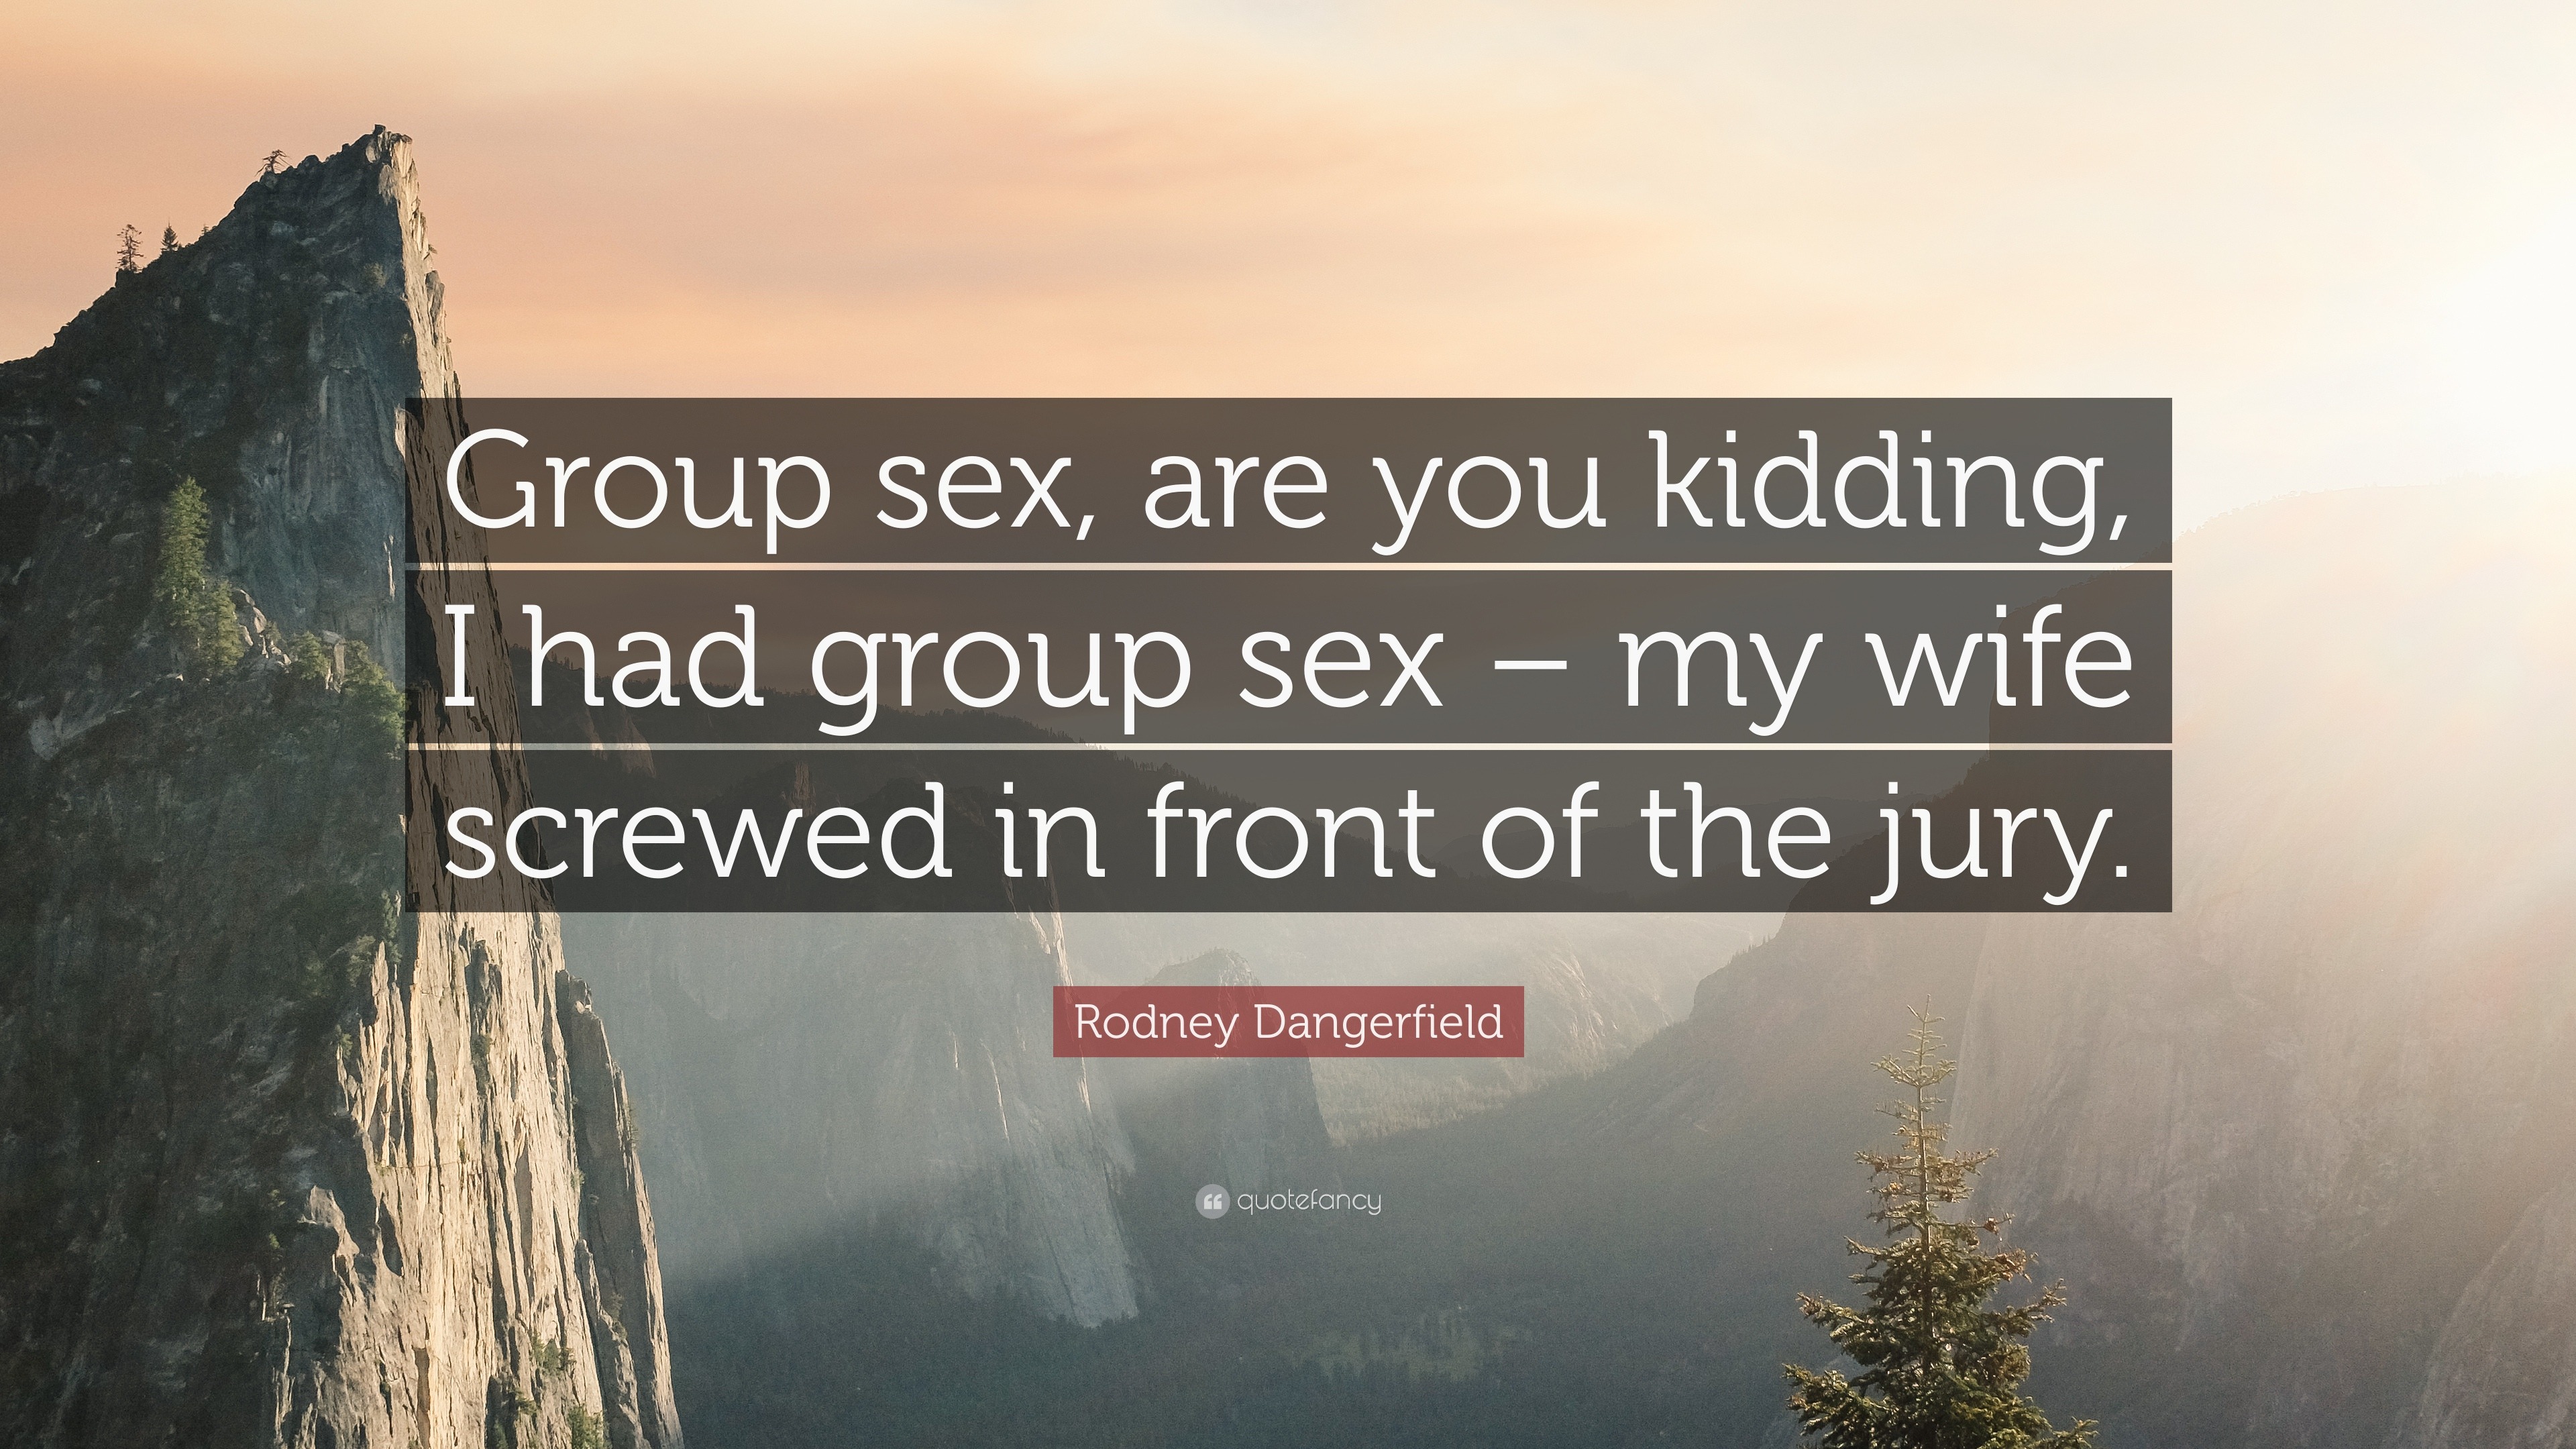 Rodney Dangerfield Quote “Group sex, are you kidding, I had group picture